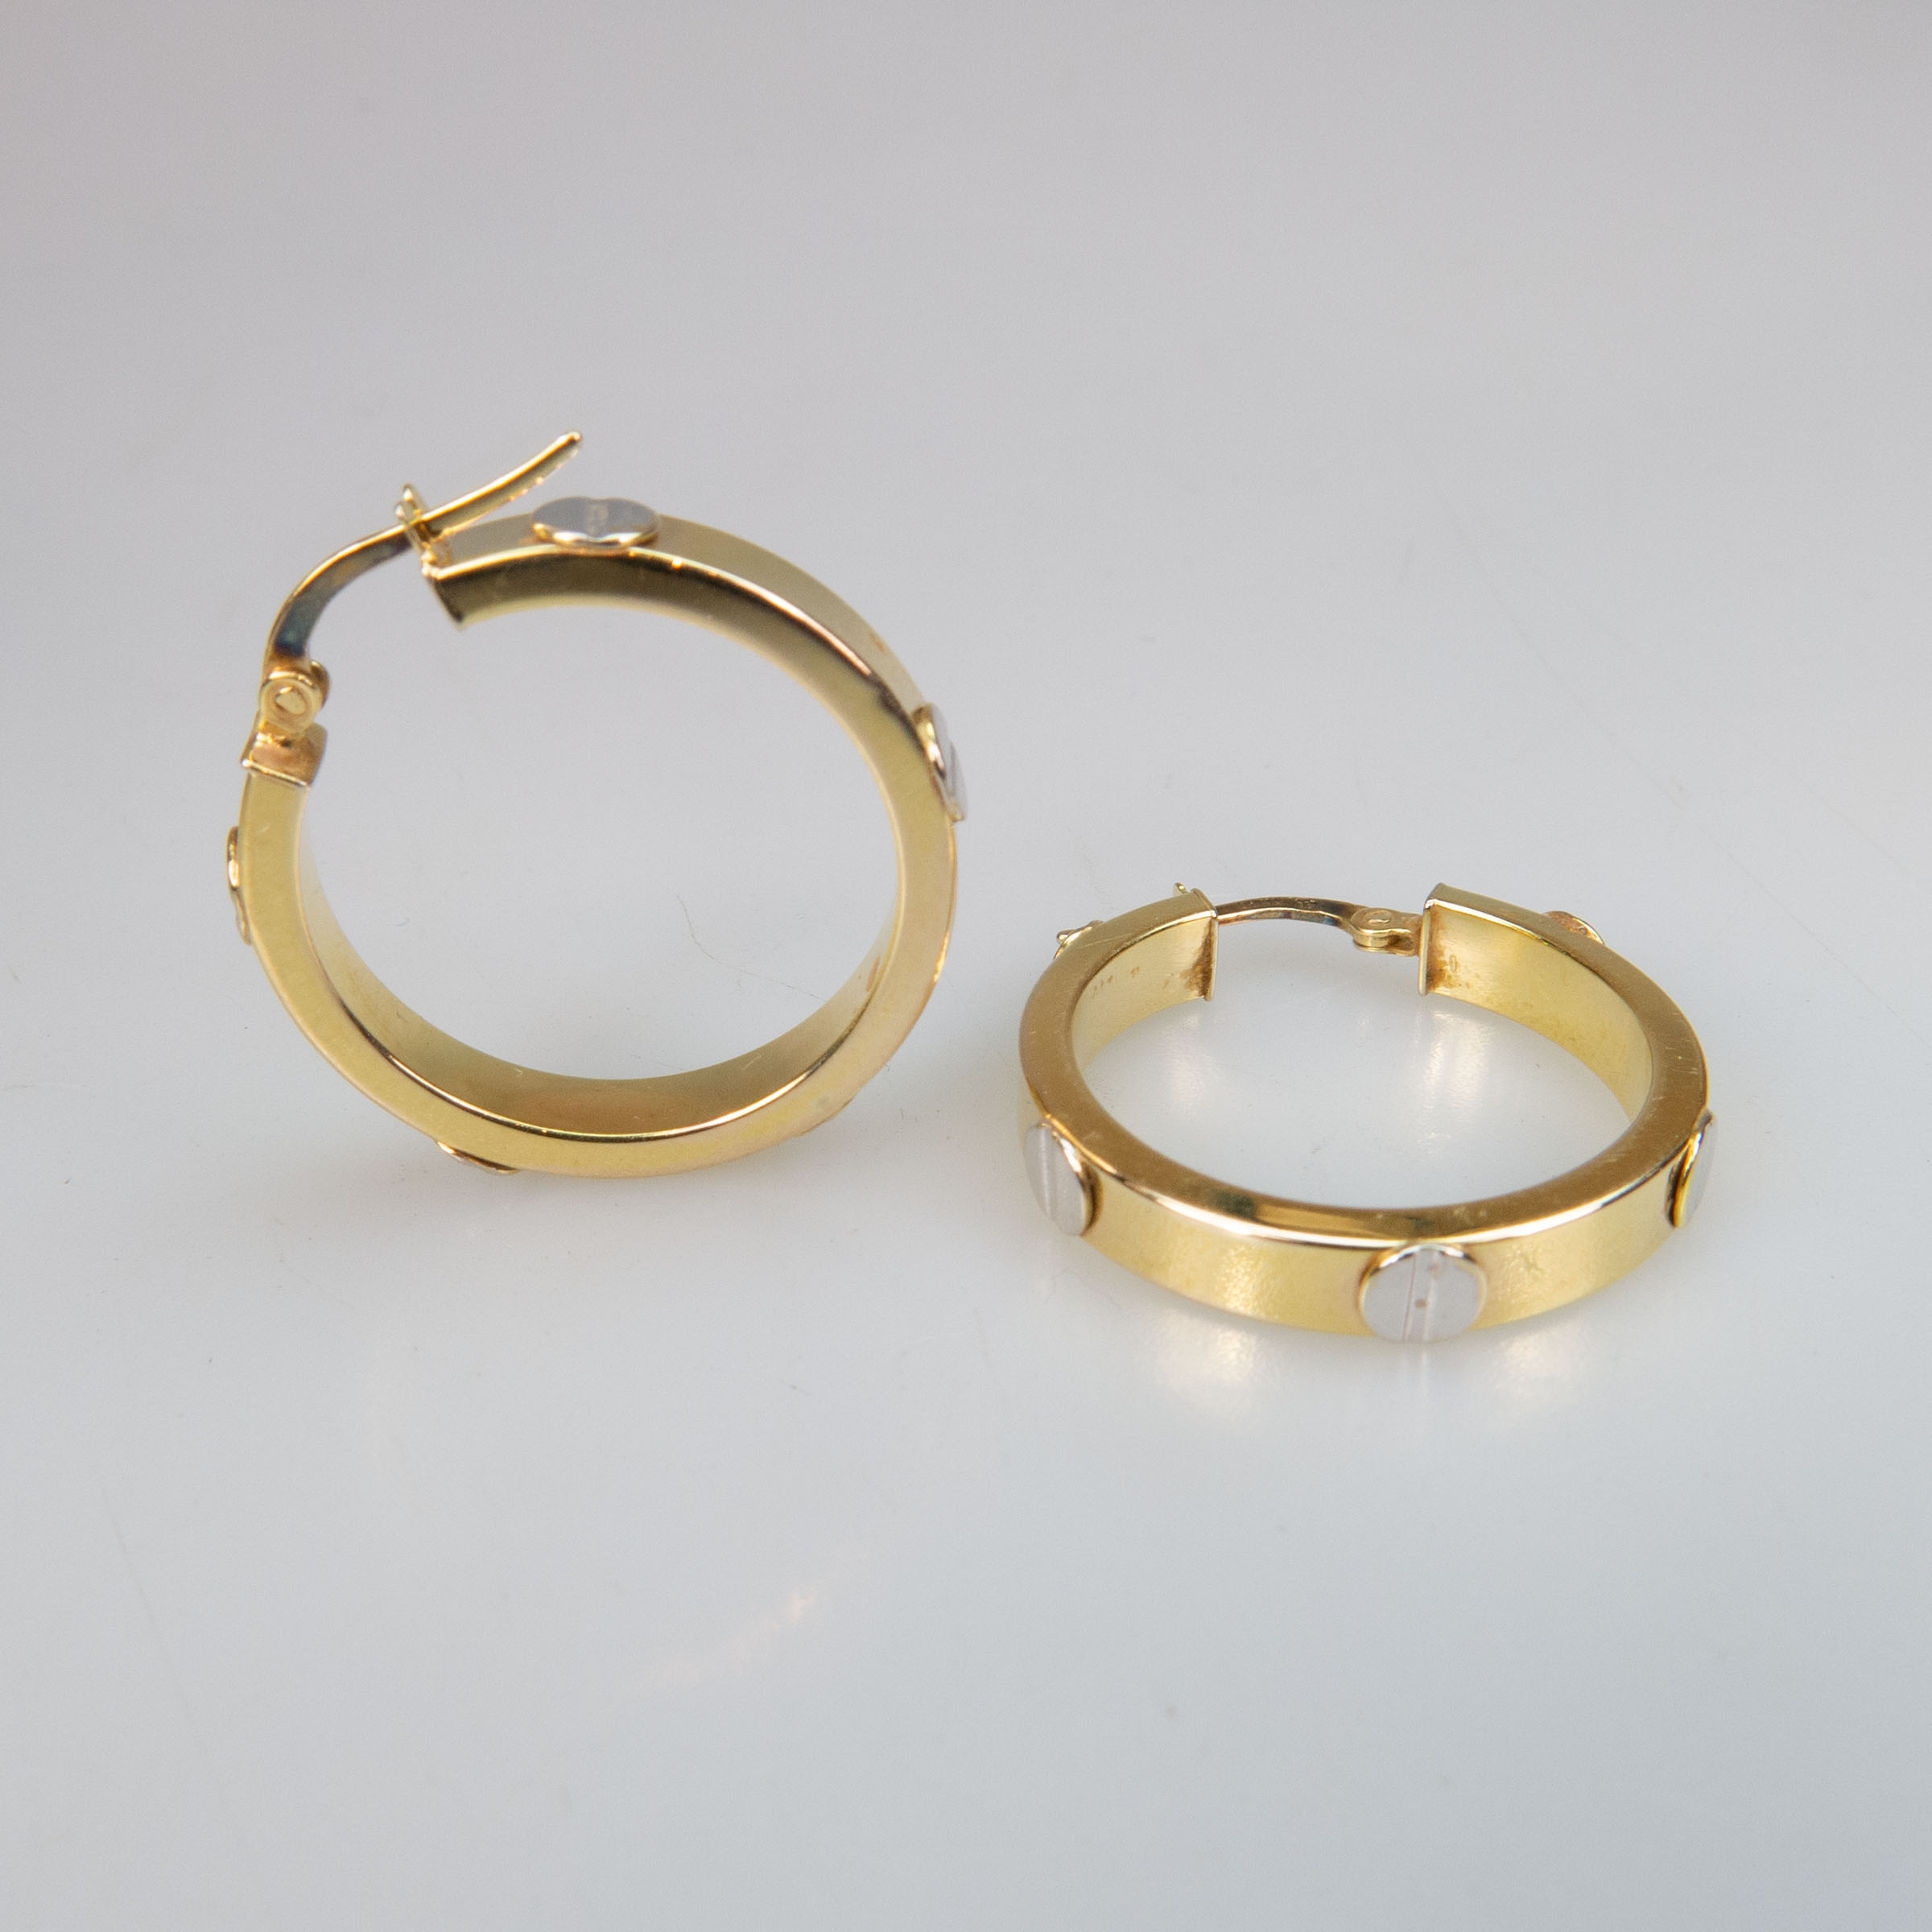 Pair Of 14k Yellow And White Gold Hoop Earrings